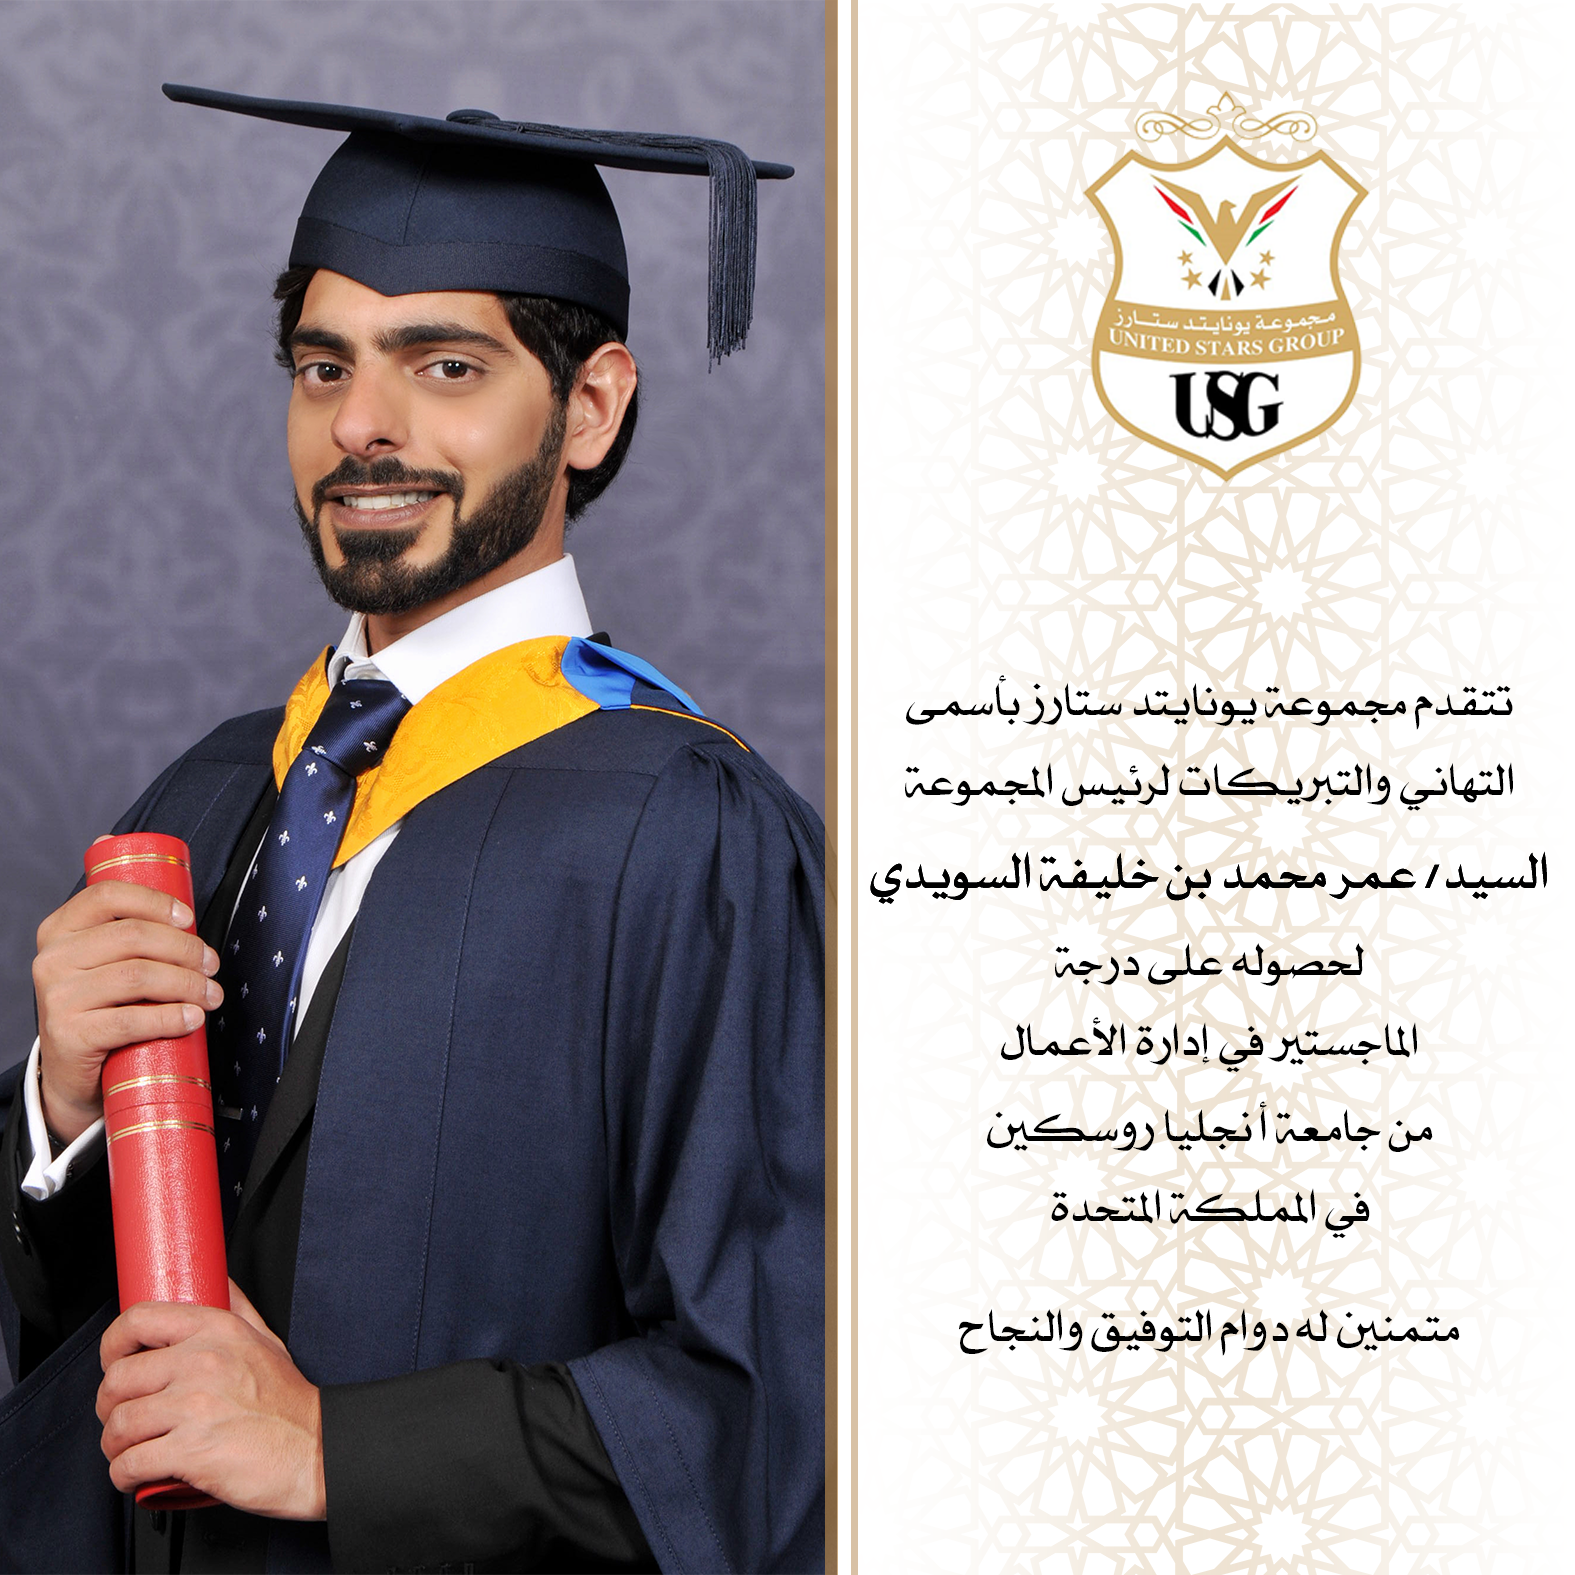 USG congratulates Group President on graduating from Anglia Ruskin University in UK